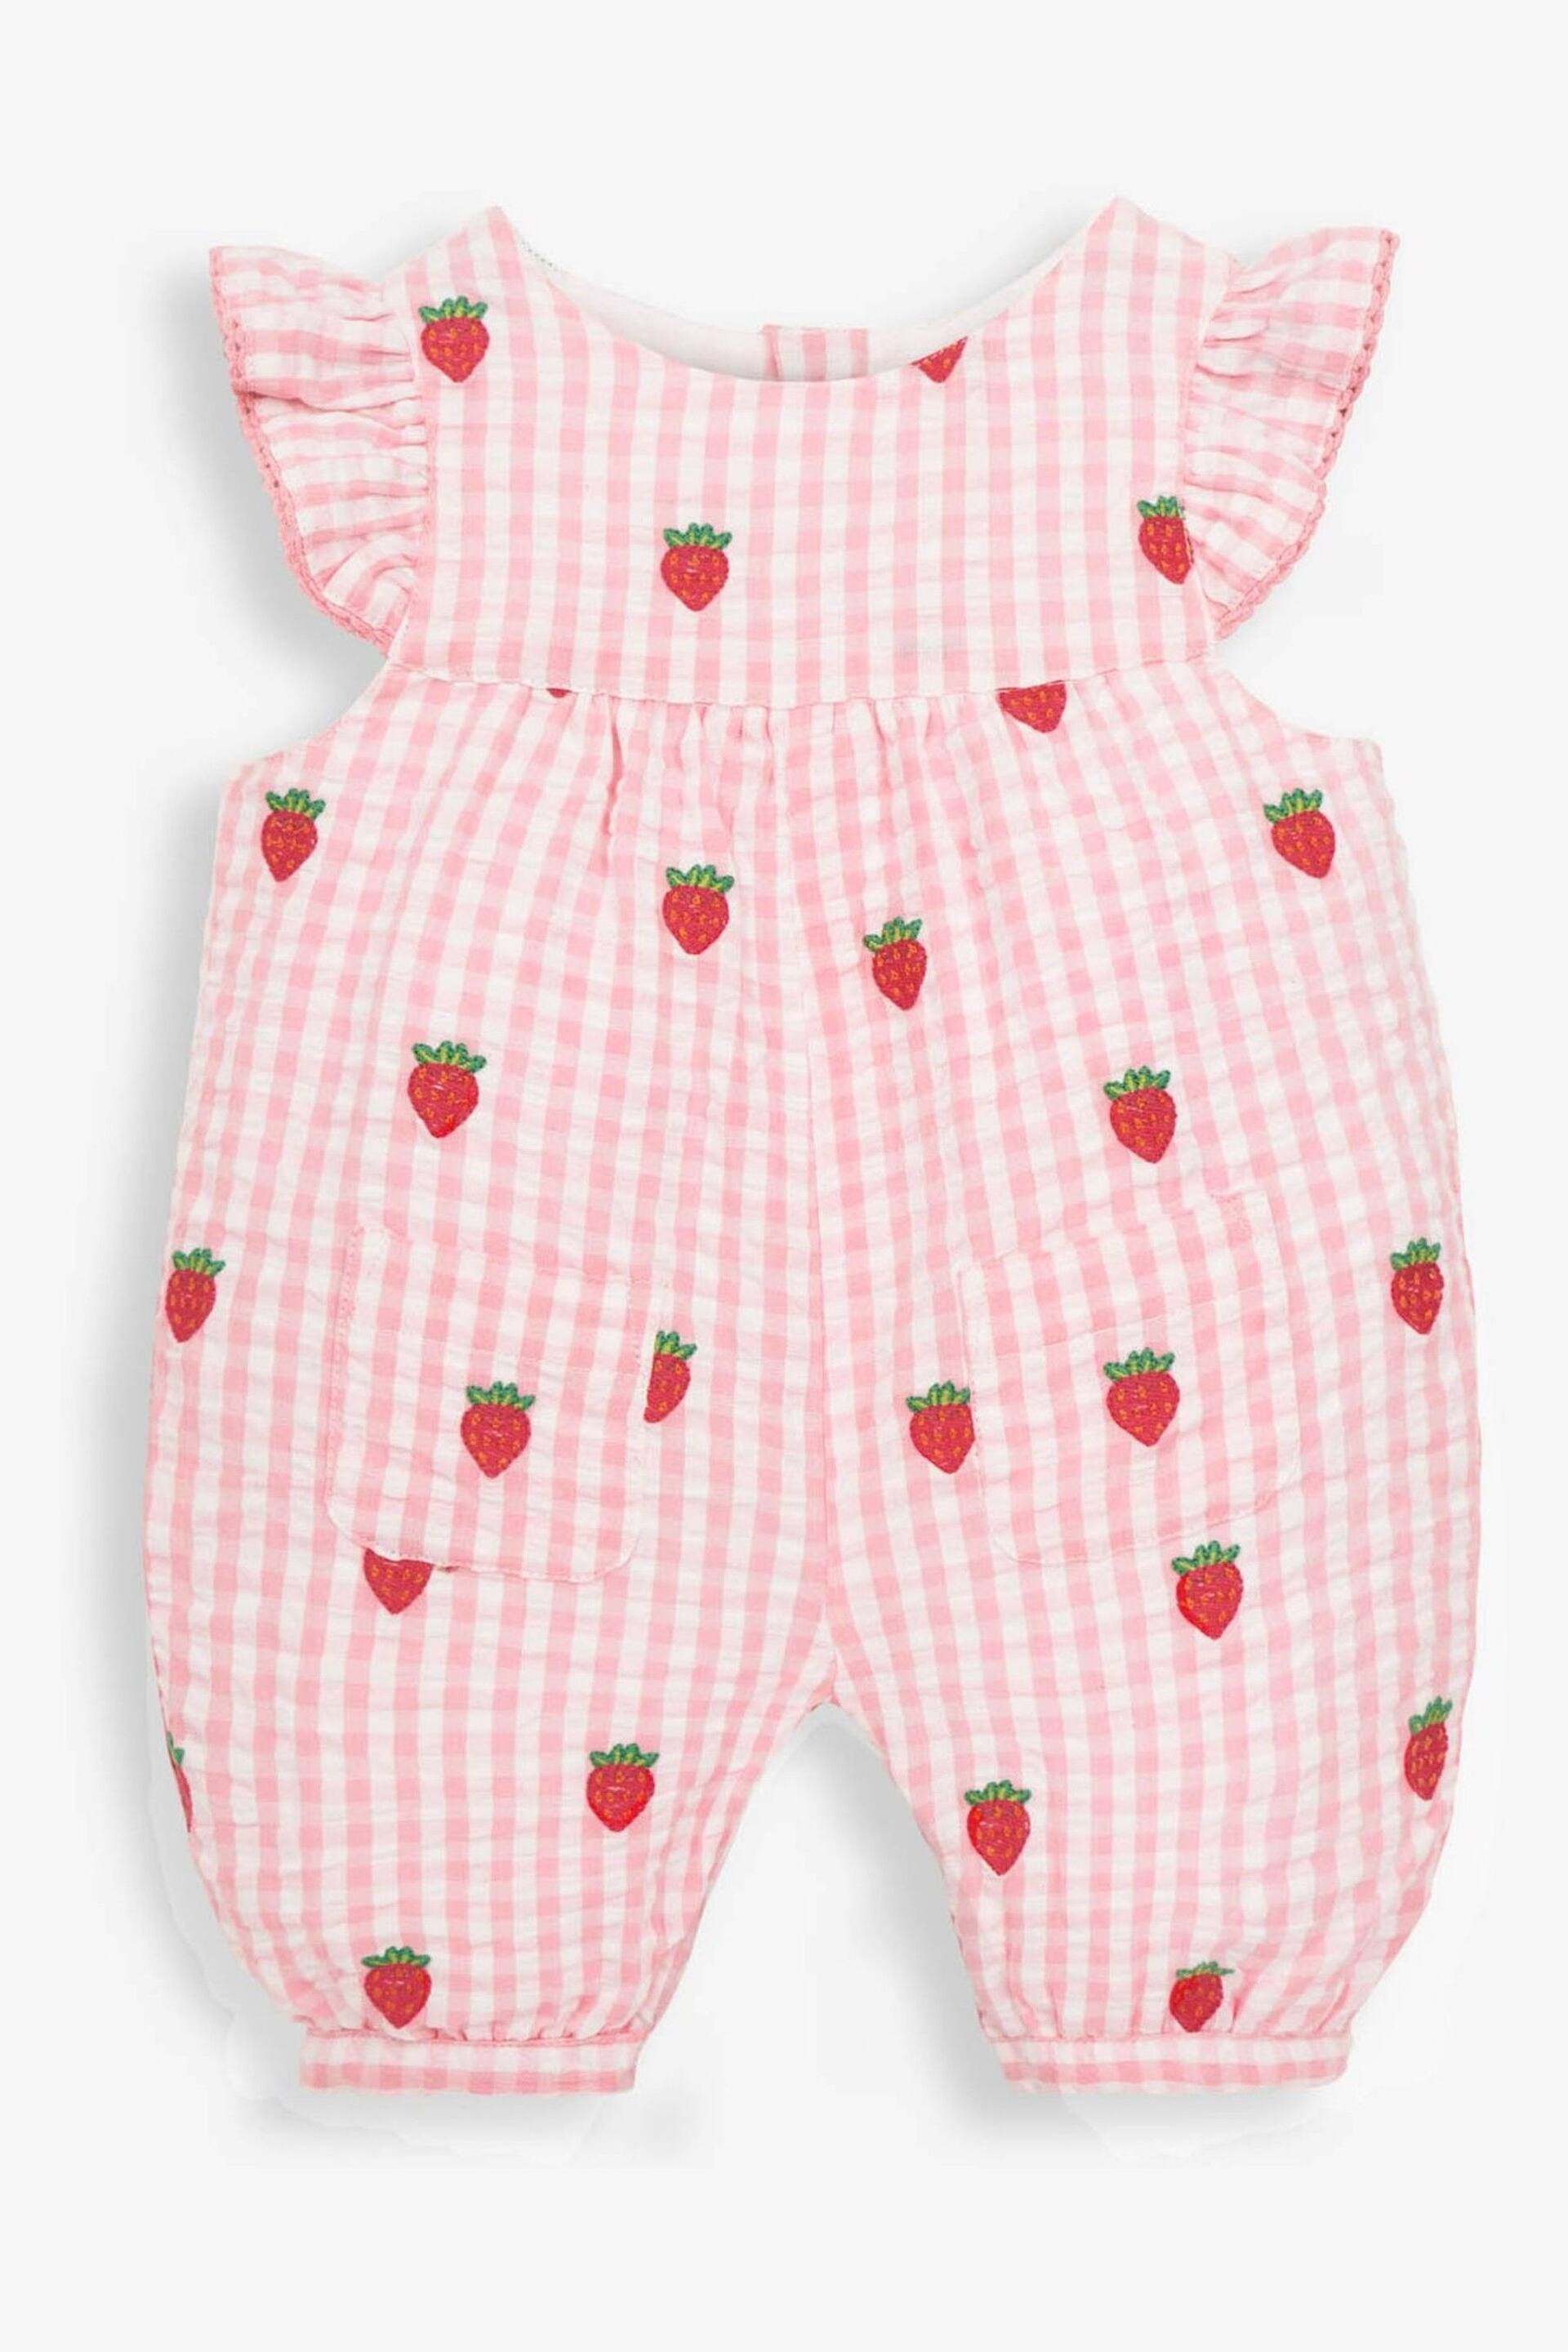 JoJo Maman Bébé Pink Gingham Strawberry Embroidered Pretty Sunsuit - Image 4 of 5